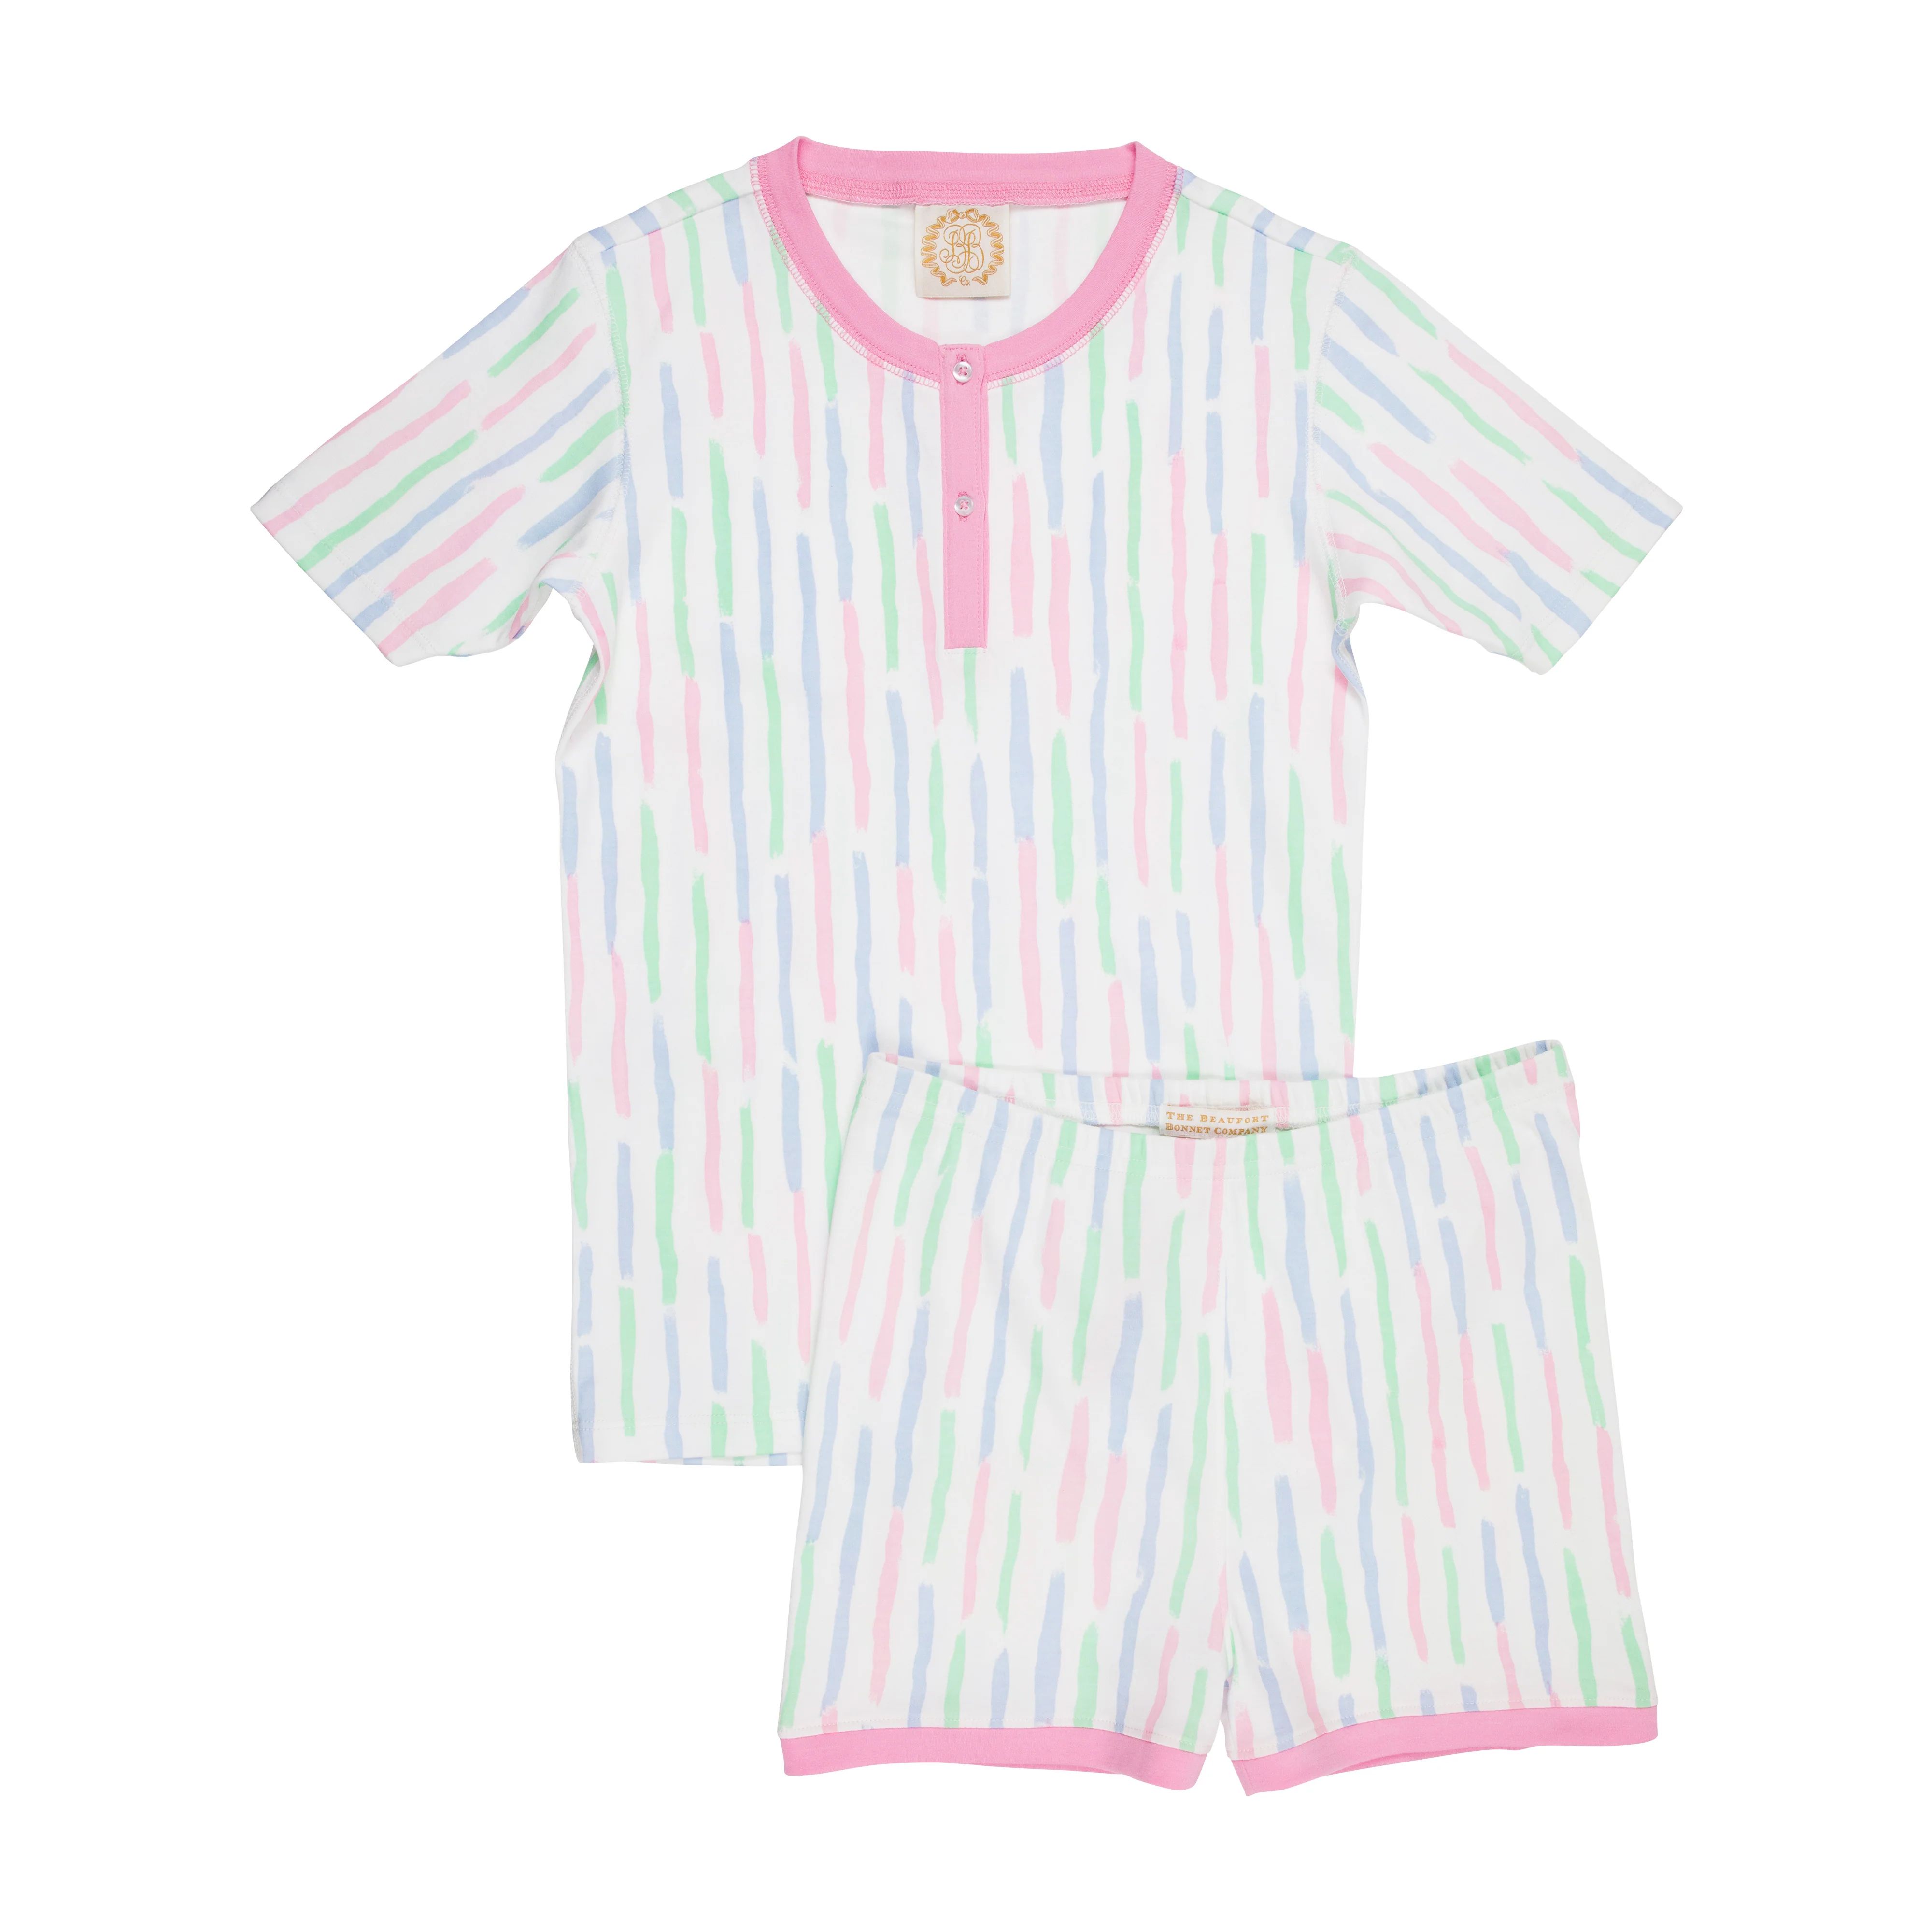 Sara Jane's Short Set - White Sand Watercolor with Hamptons Hot Pink | The Beaufort Bonnet Company